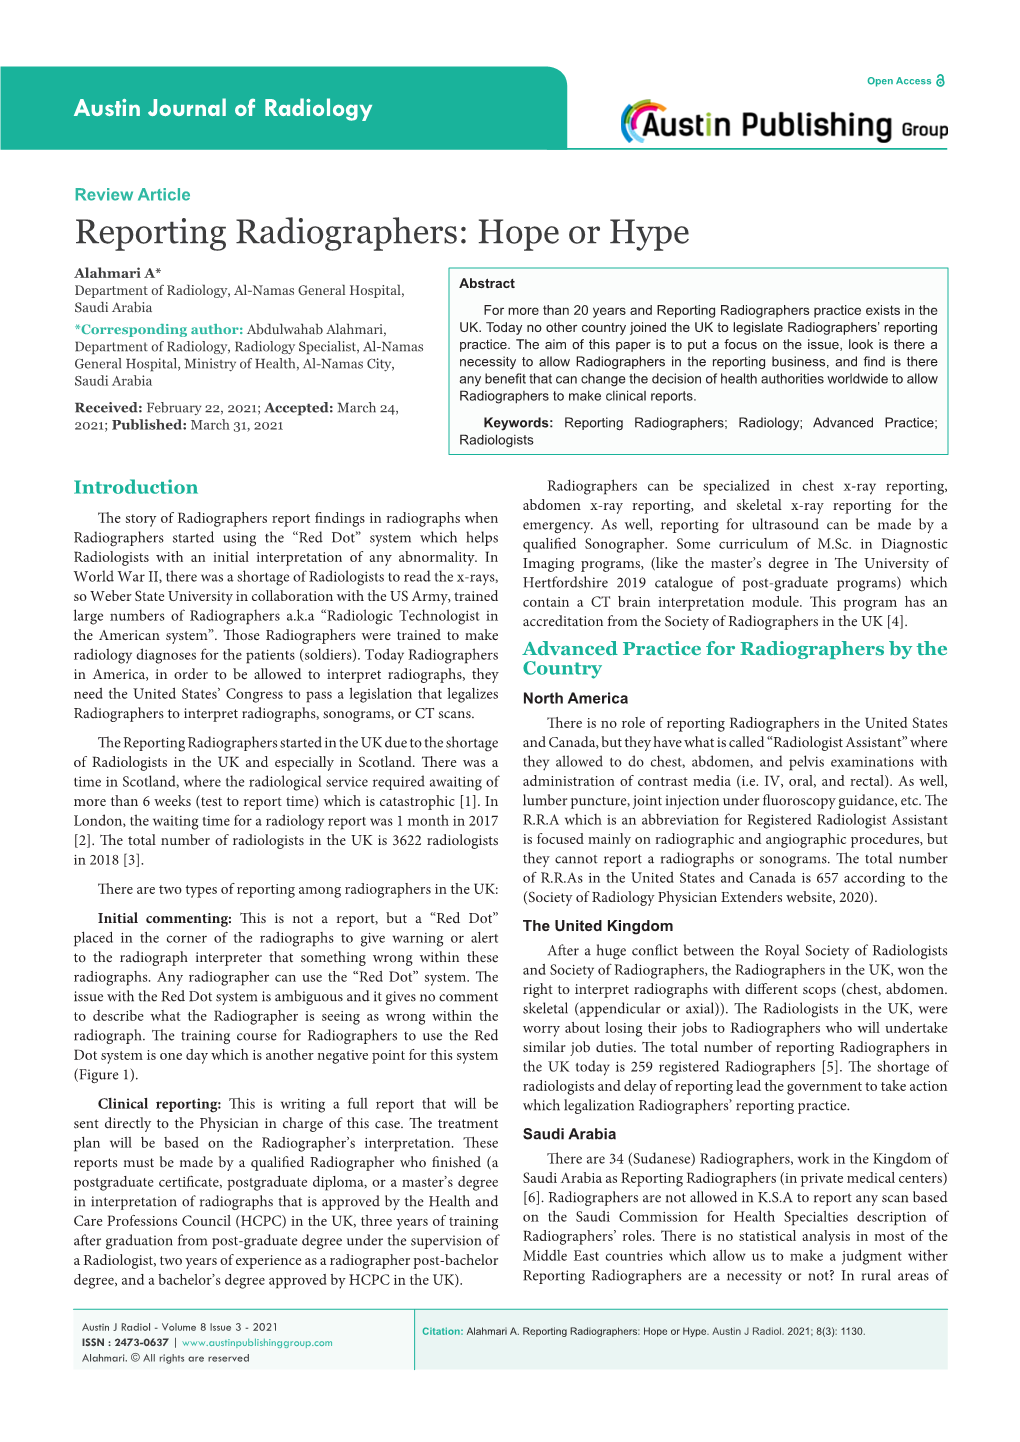 Reporting Radiographers: Hope Or Hype